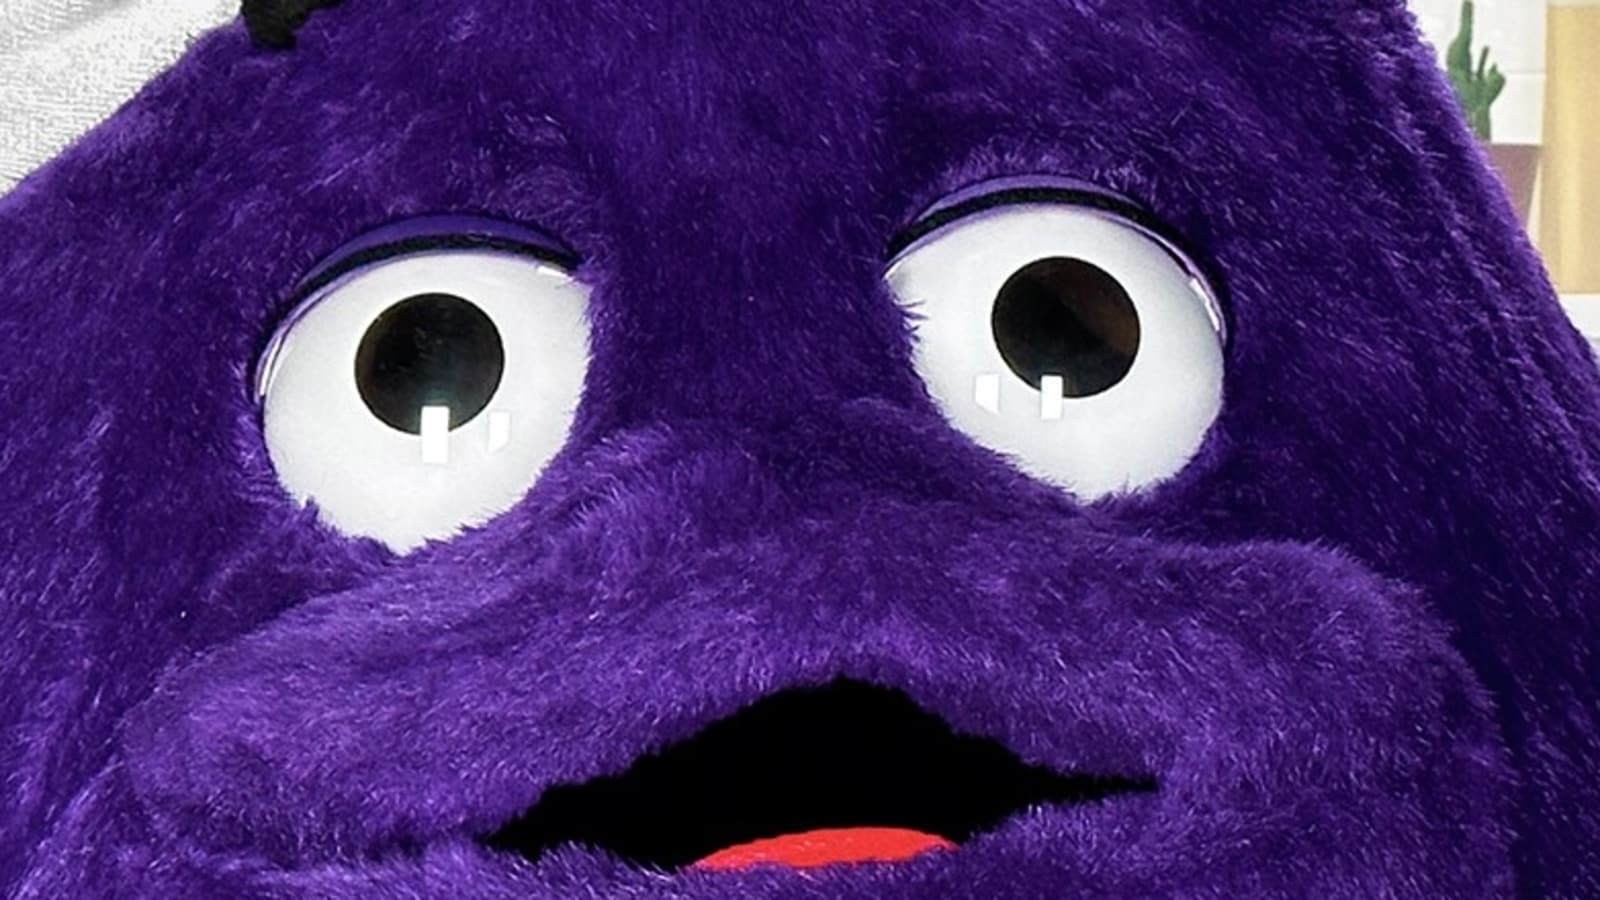 Grimace Shake trend explained, are you 'lovin' it'?